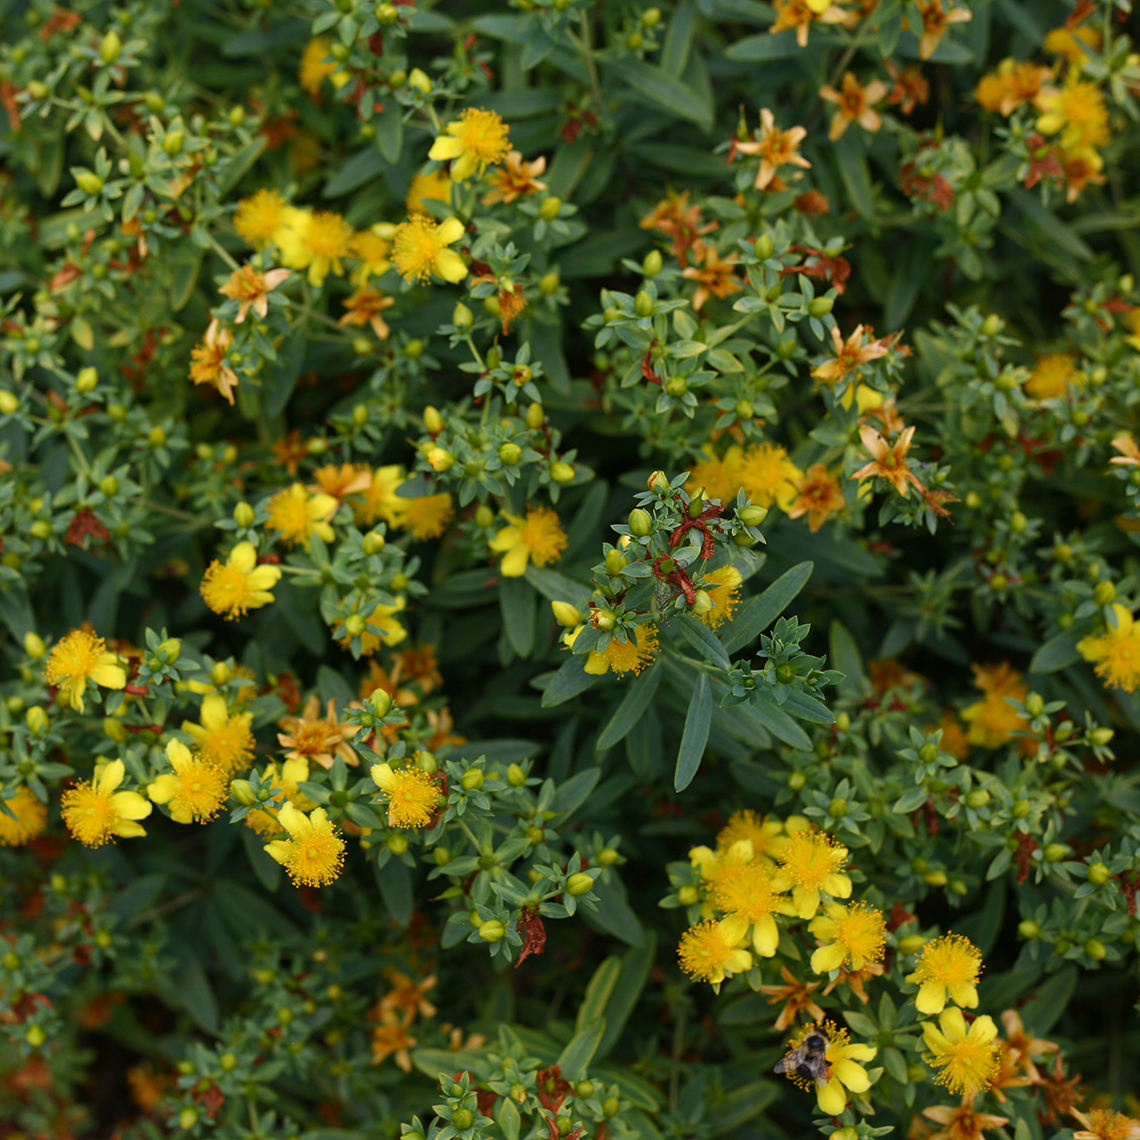 Closeup of a portion of Blues Festival hypericum showing its flower coverage and contrast with the blue foliage